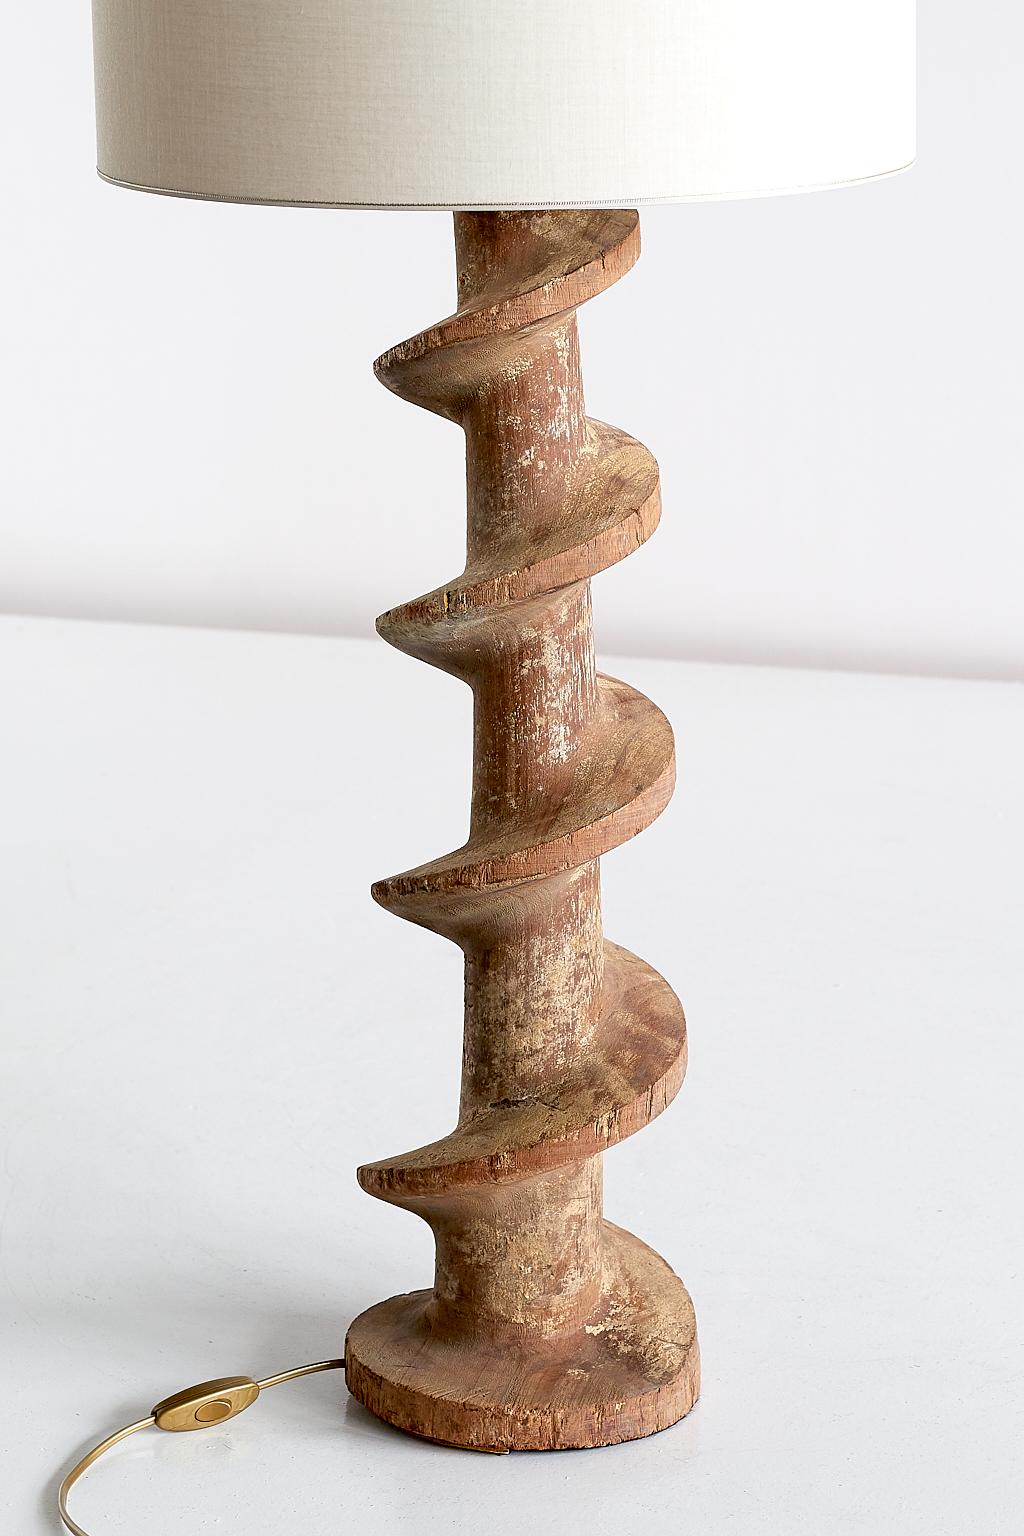 Belgian Pair of Table Lamps with Wooden Spiral Screw Base, Belgium, Late 19th Century